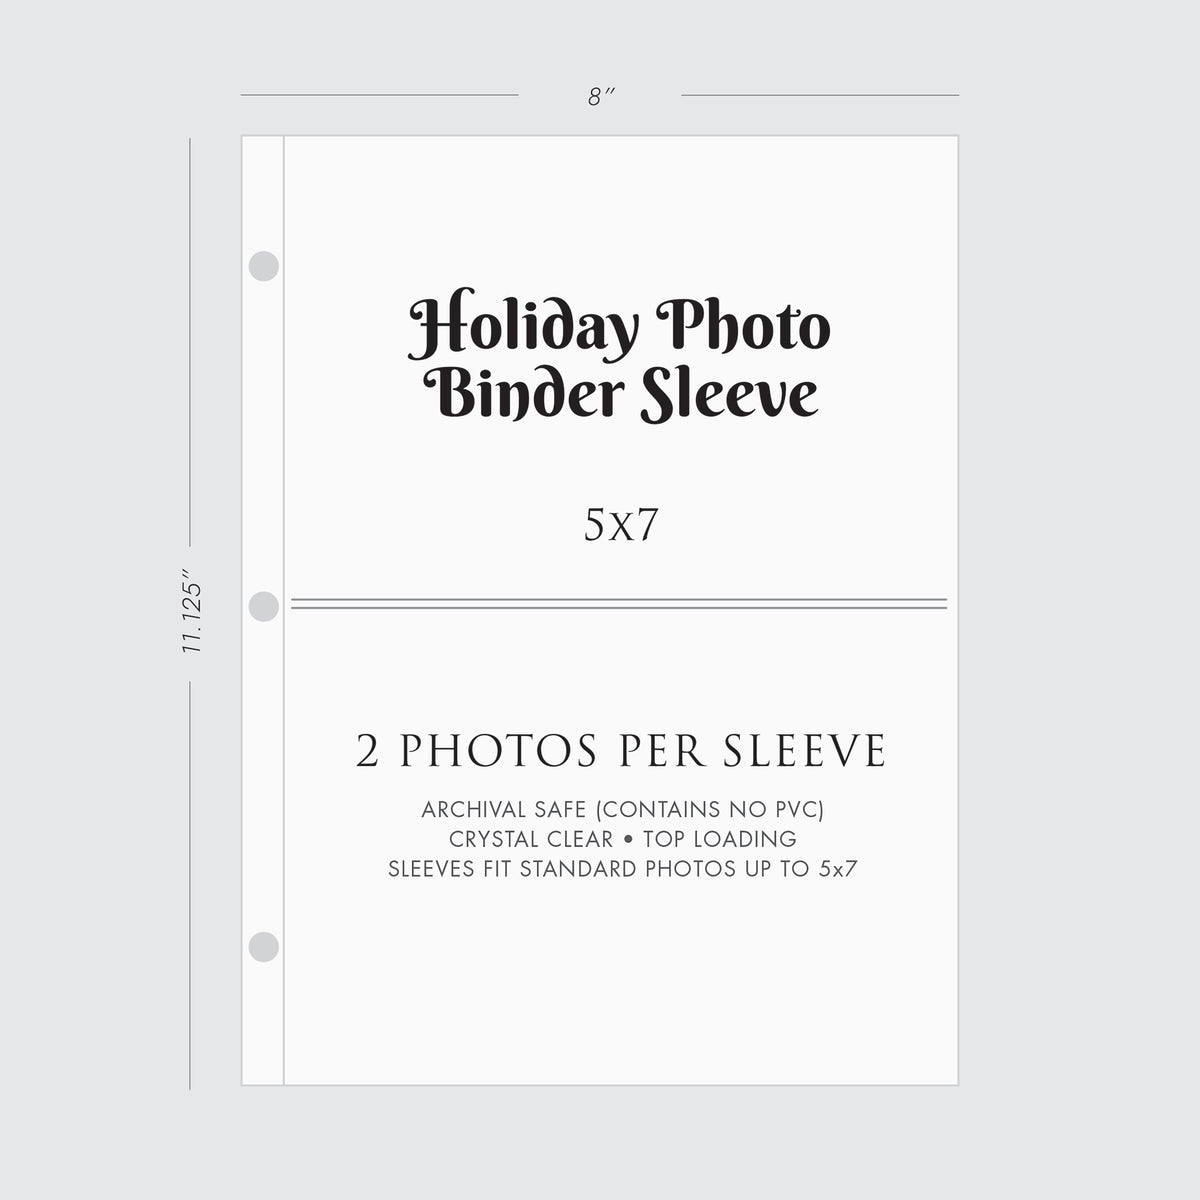 Large Holiday Photo Binder with Champagne Silk Cover for 4x6 or 5x7 Photos